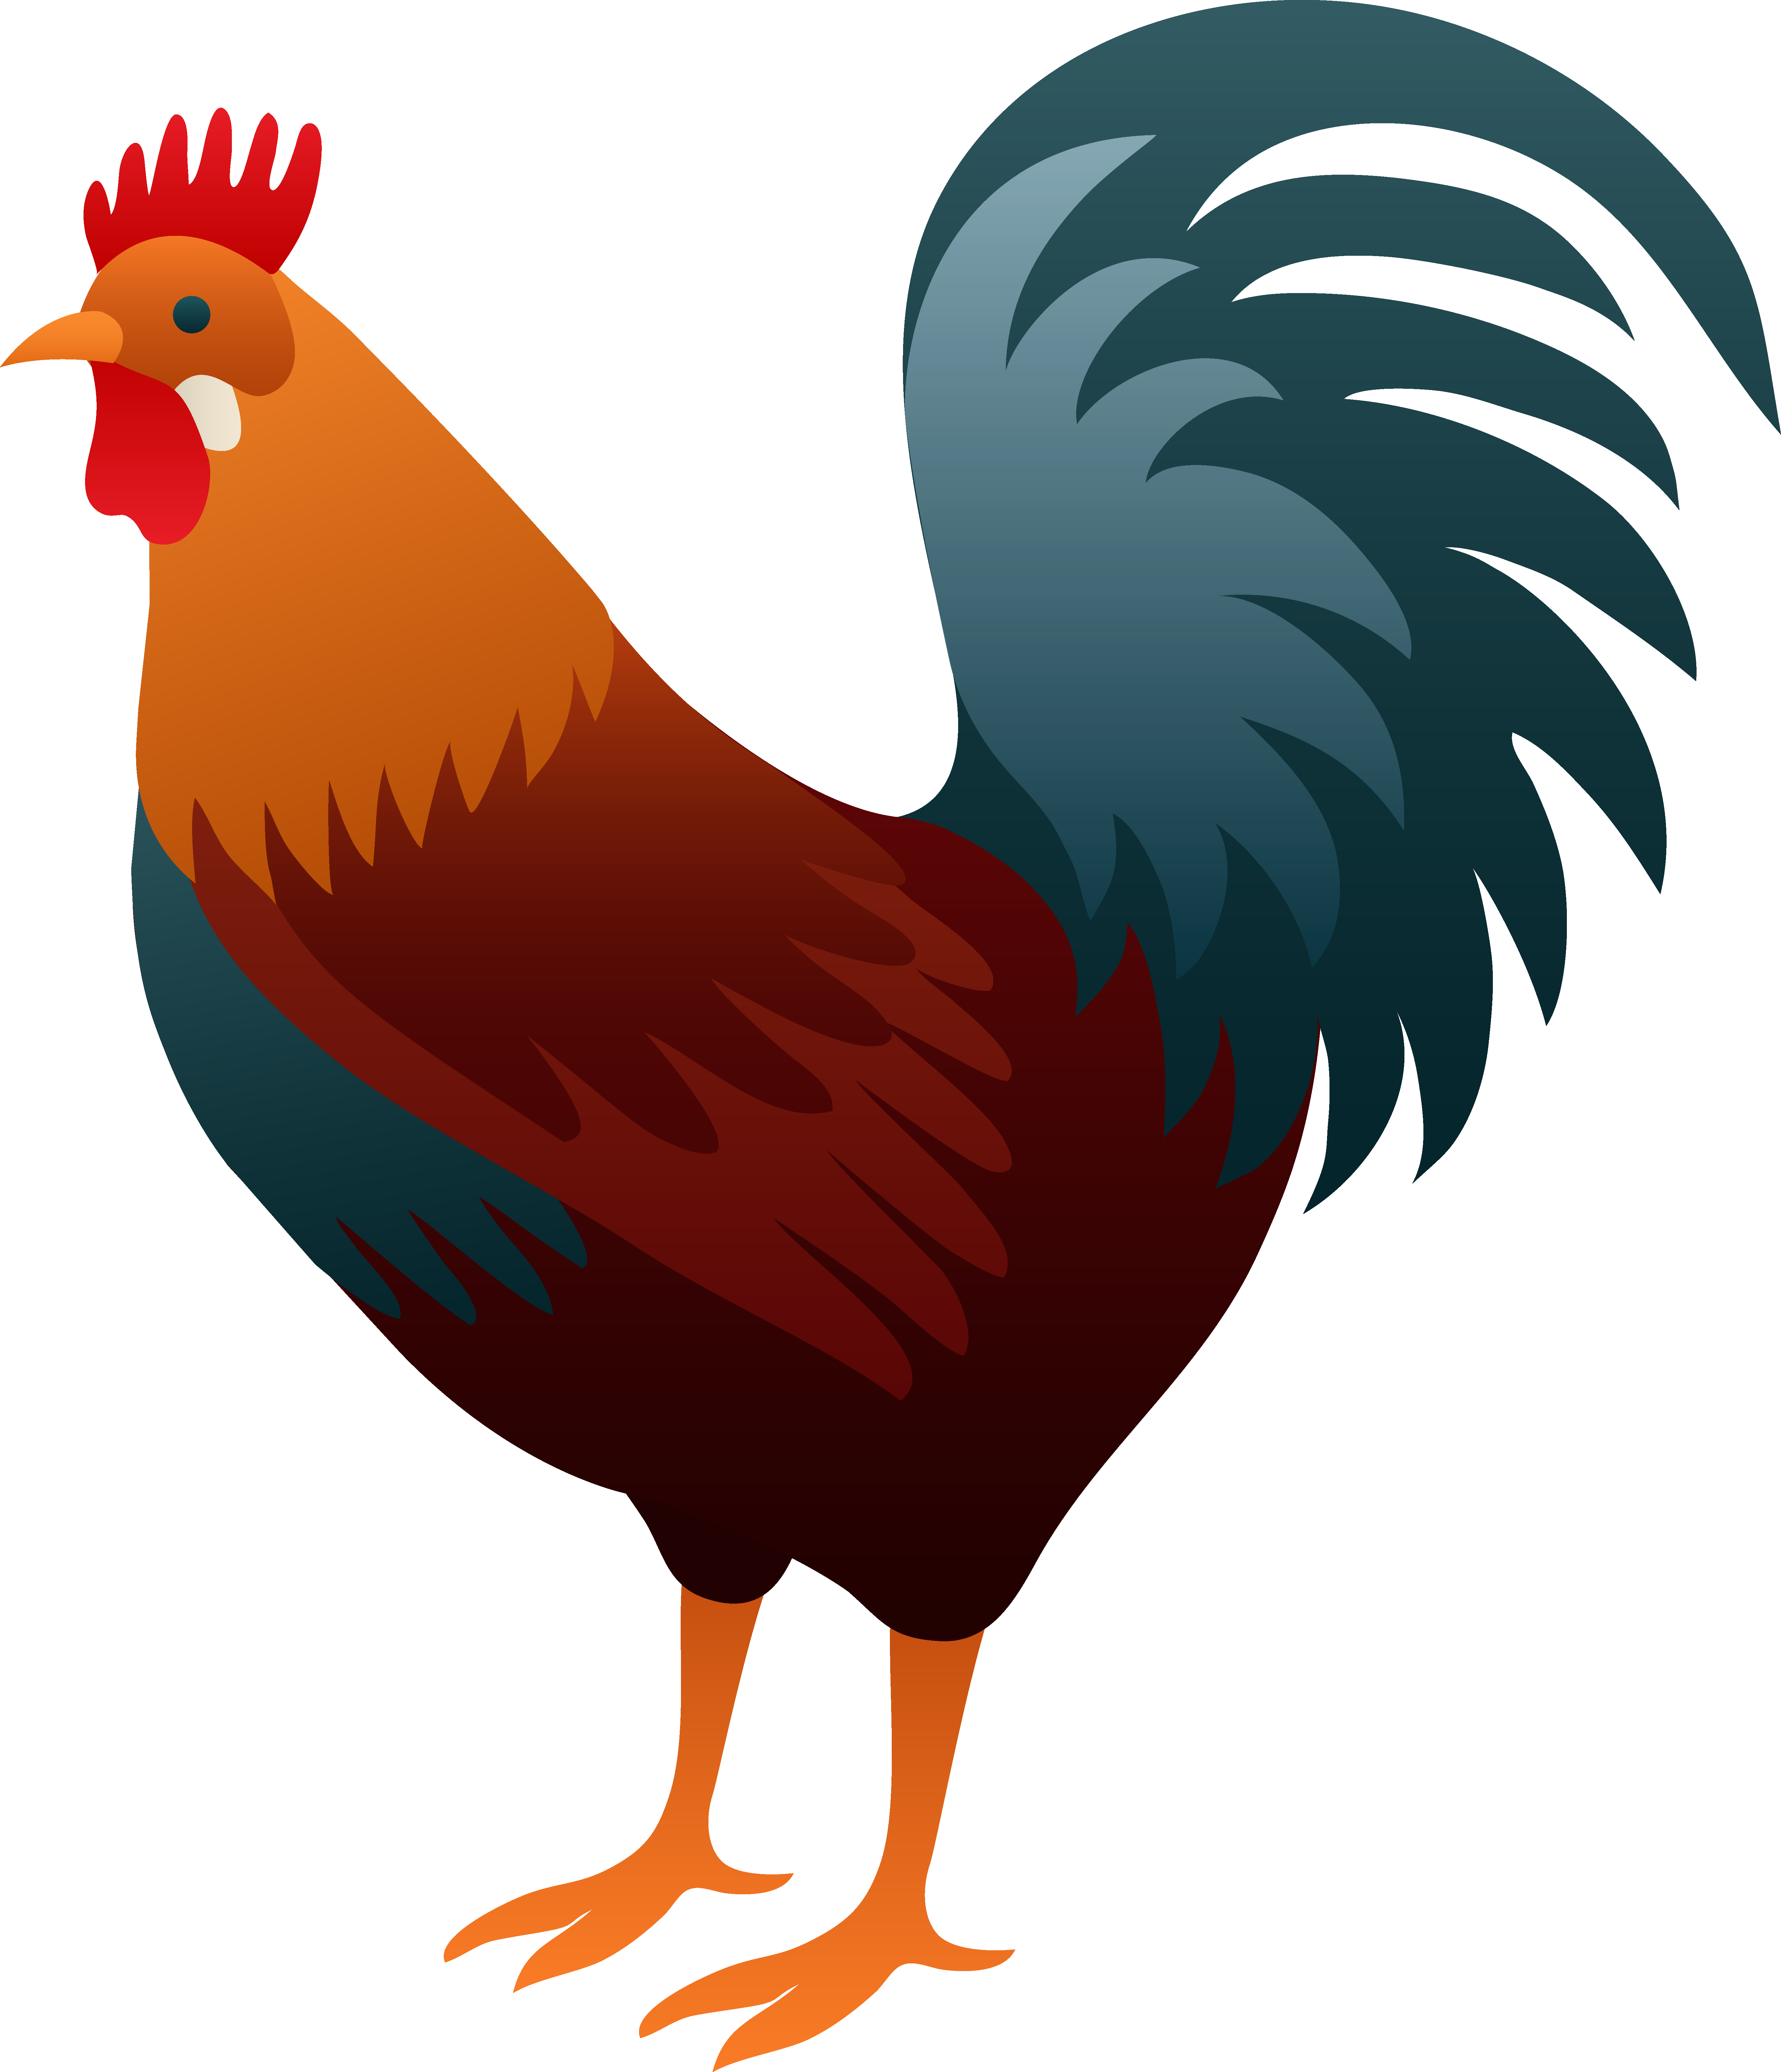 Rooster Cartoon Images - ClipArt Best - ClipArt Best